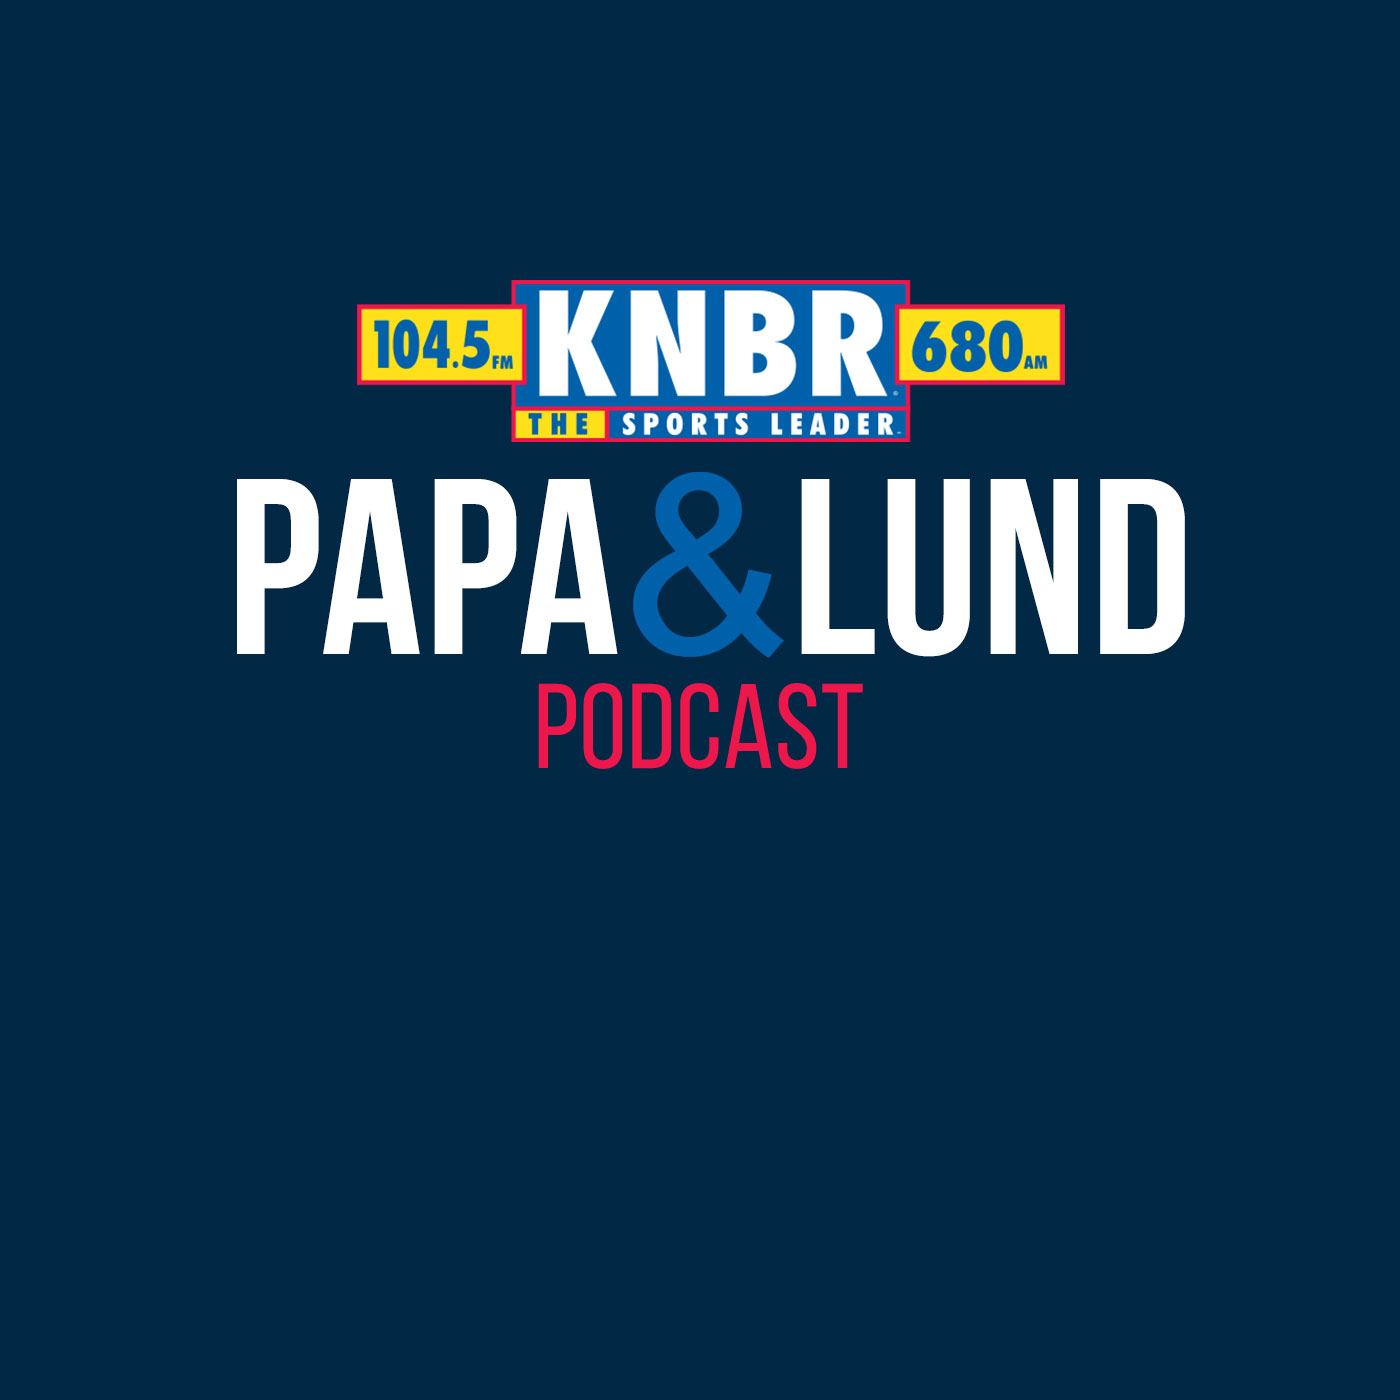 3-7 Papa & Lund Show- Hour 3 - Papa & Lund discuss Matt Chapman making his Giants debut against the Dodgers